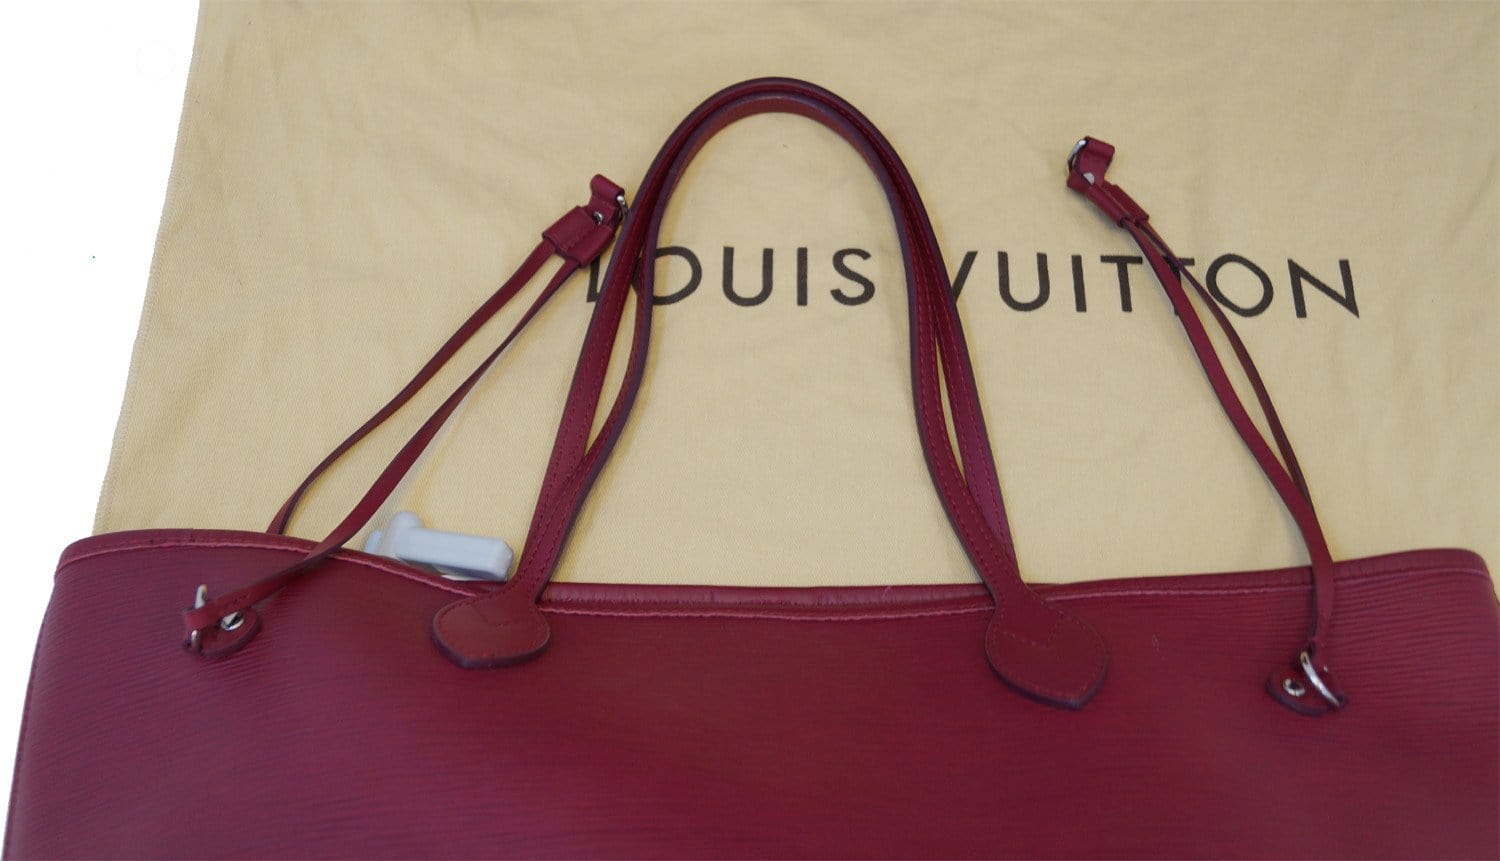 Louis Vuitton Pink Epi Leather Neverfull - The Trove